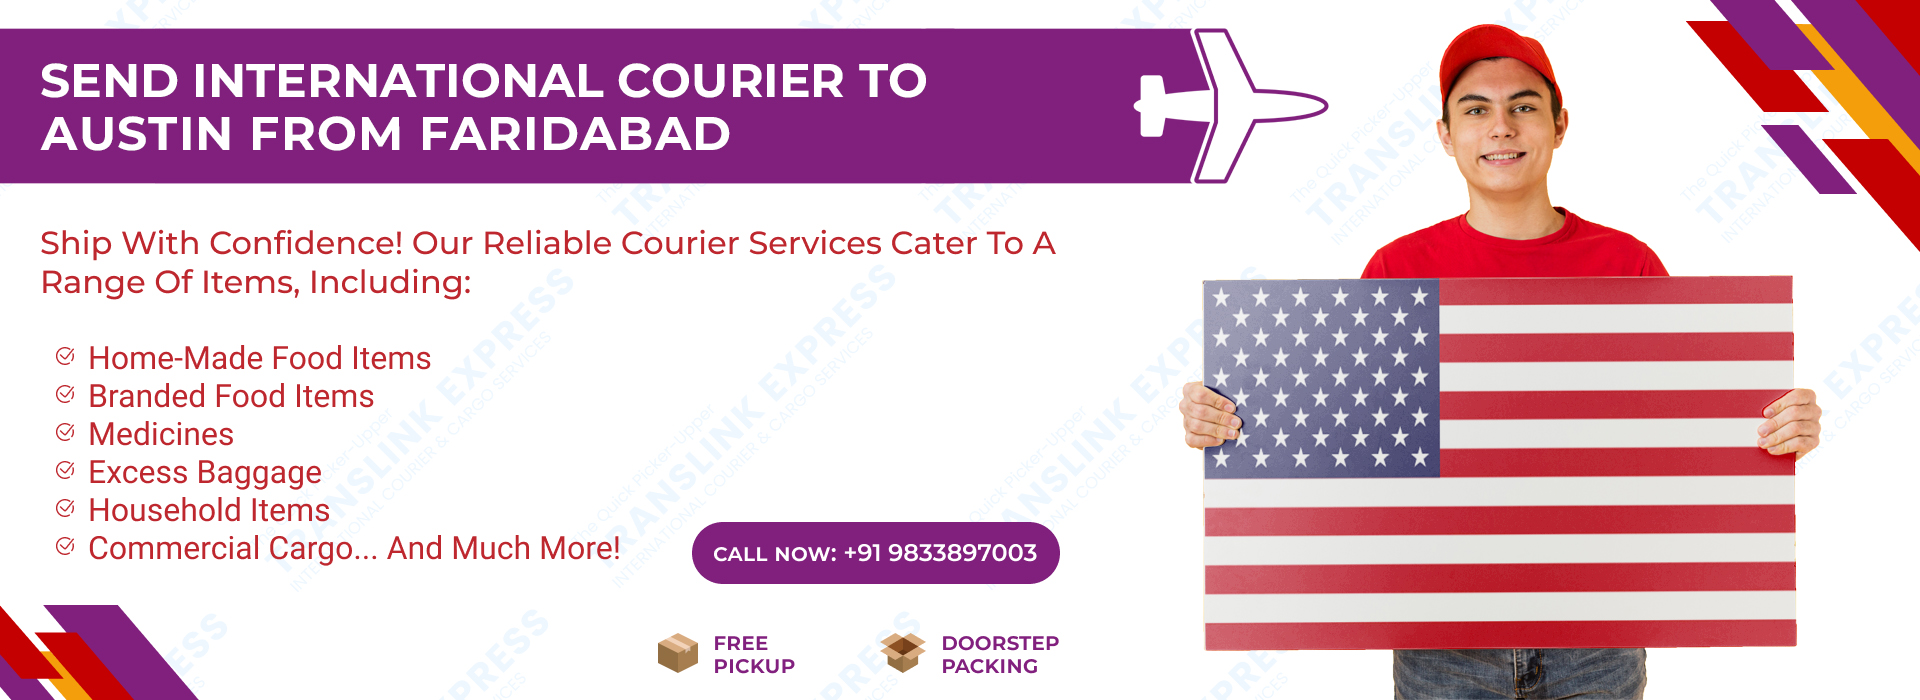 Courier to Austin From Faridabad